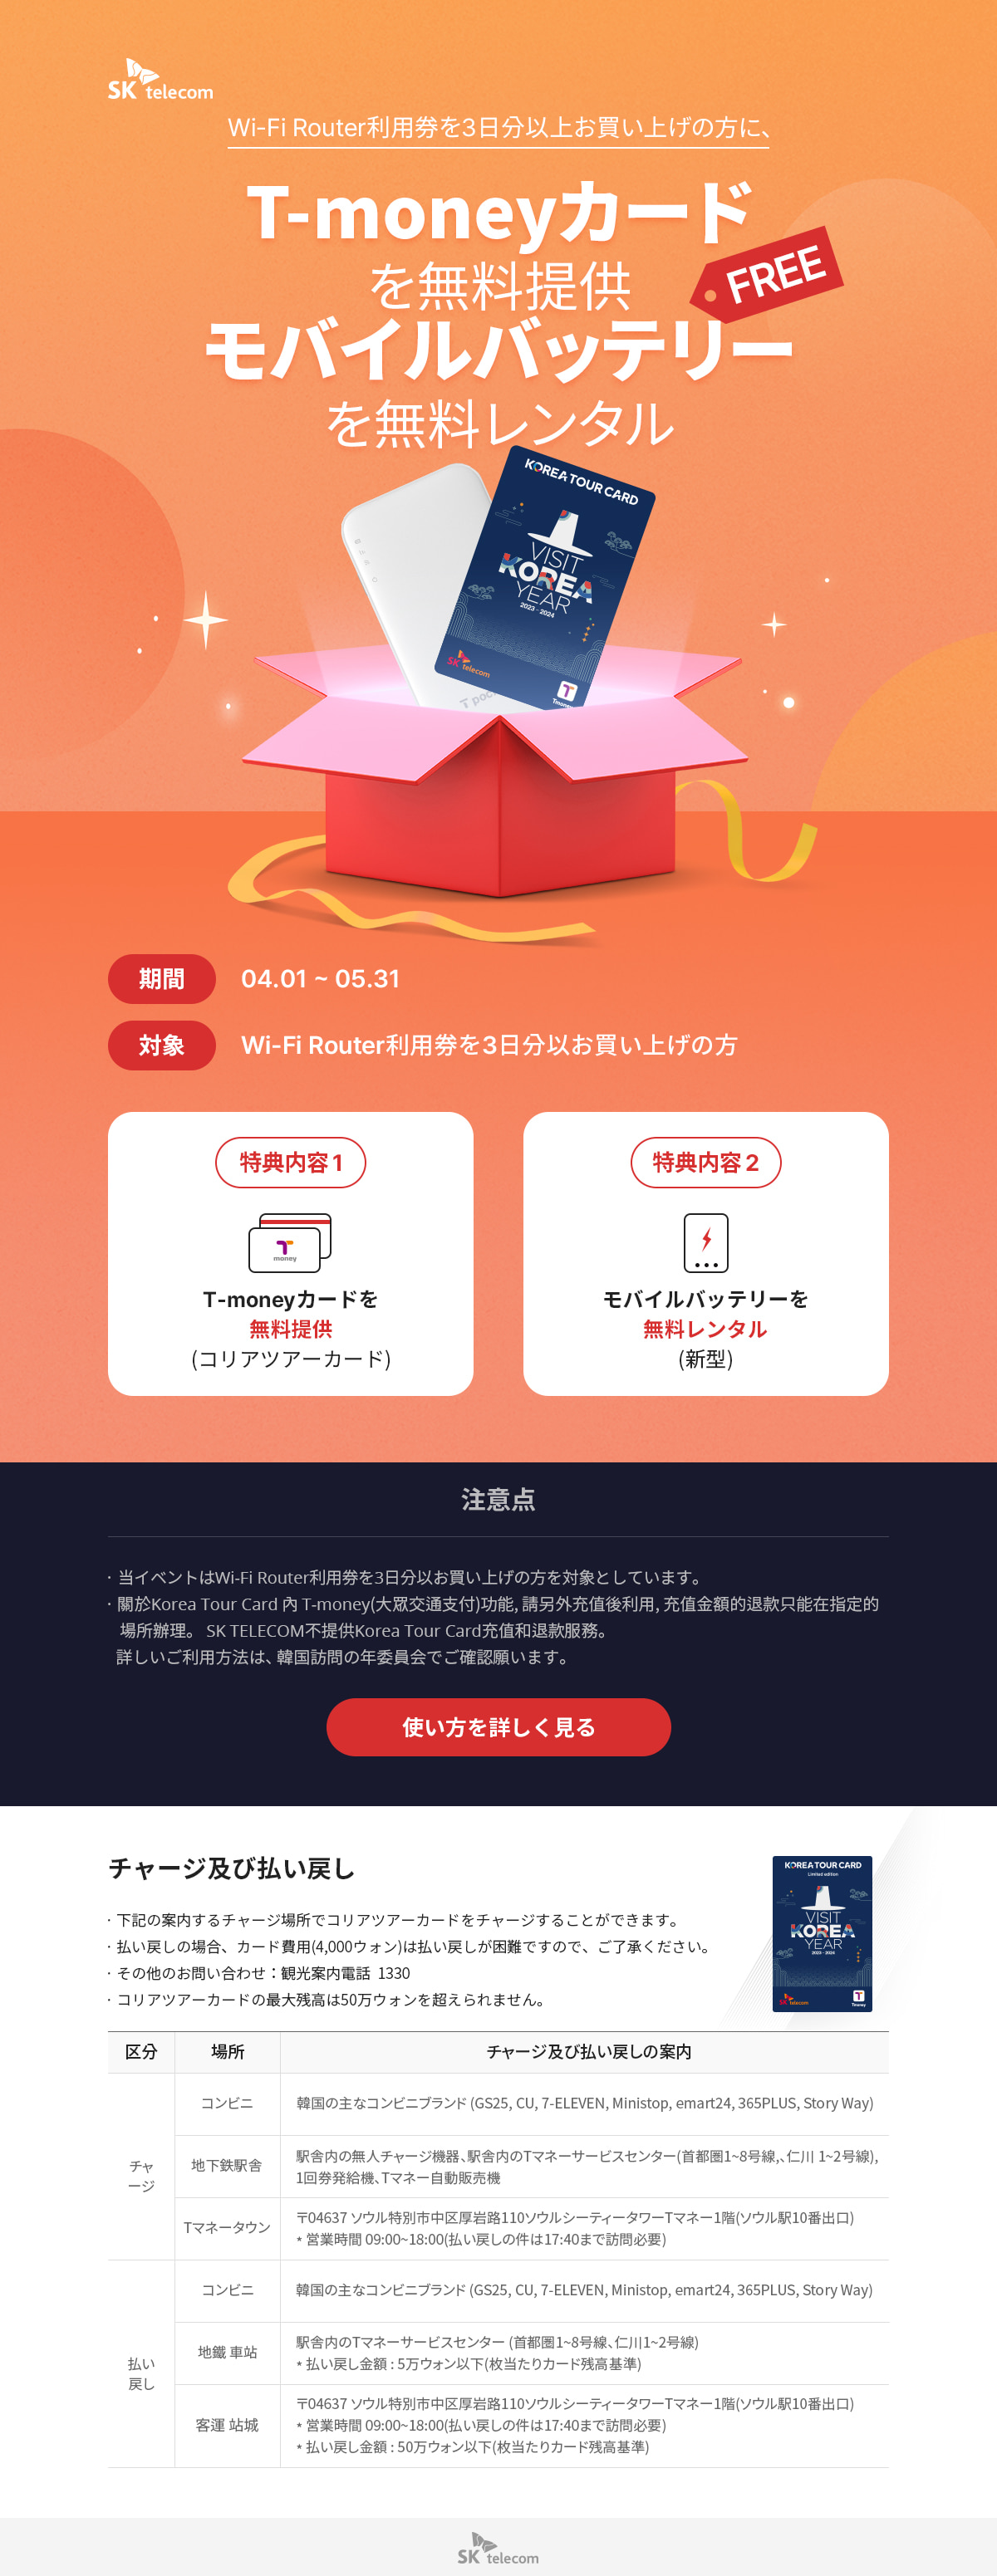 T-money card and power bank event for SK Telecom Wi-Fi Router